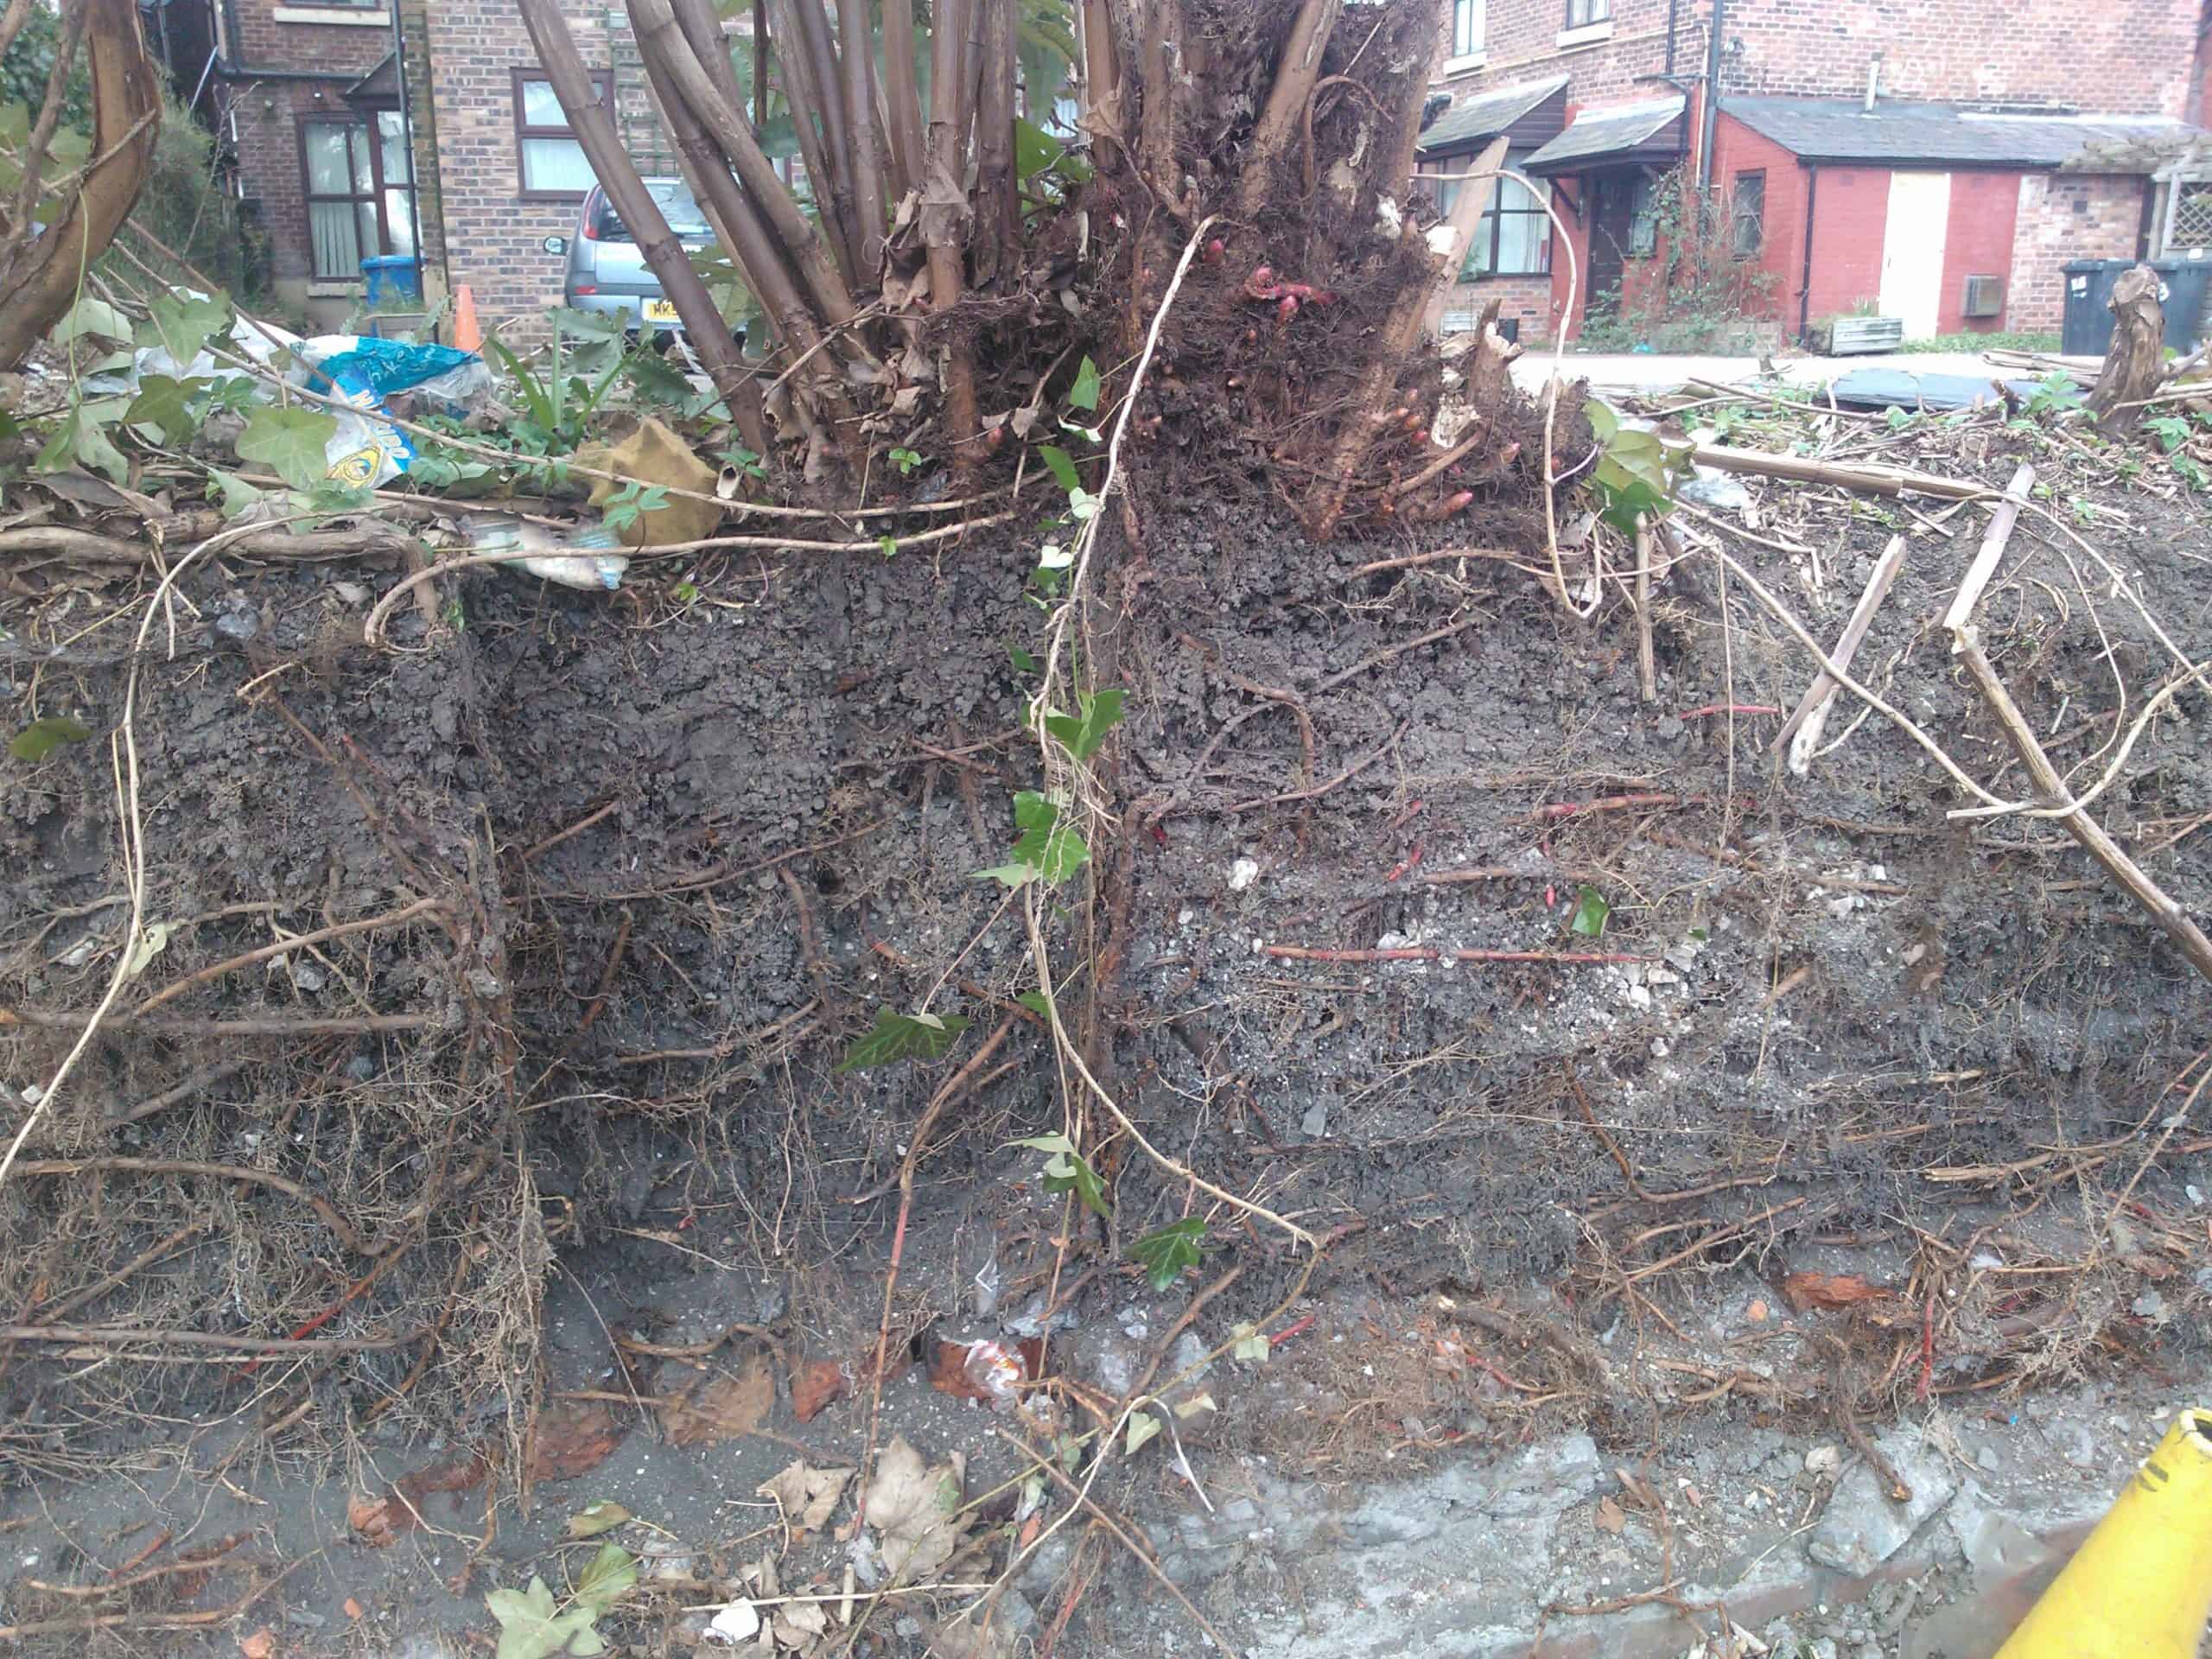 The root system of the Japanese knotweed through the seasons occupies metres underground